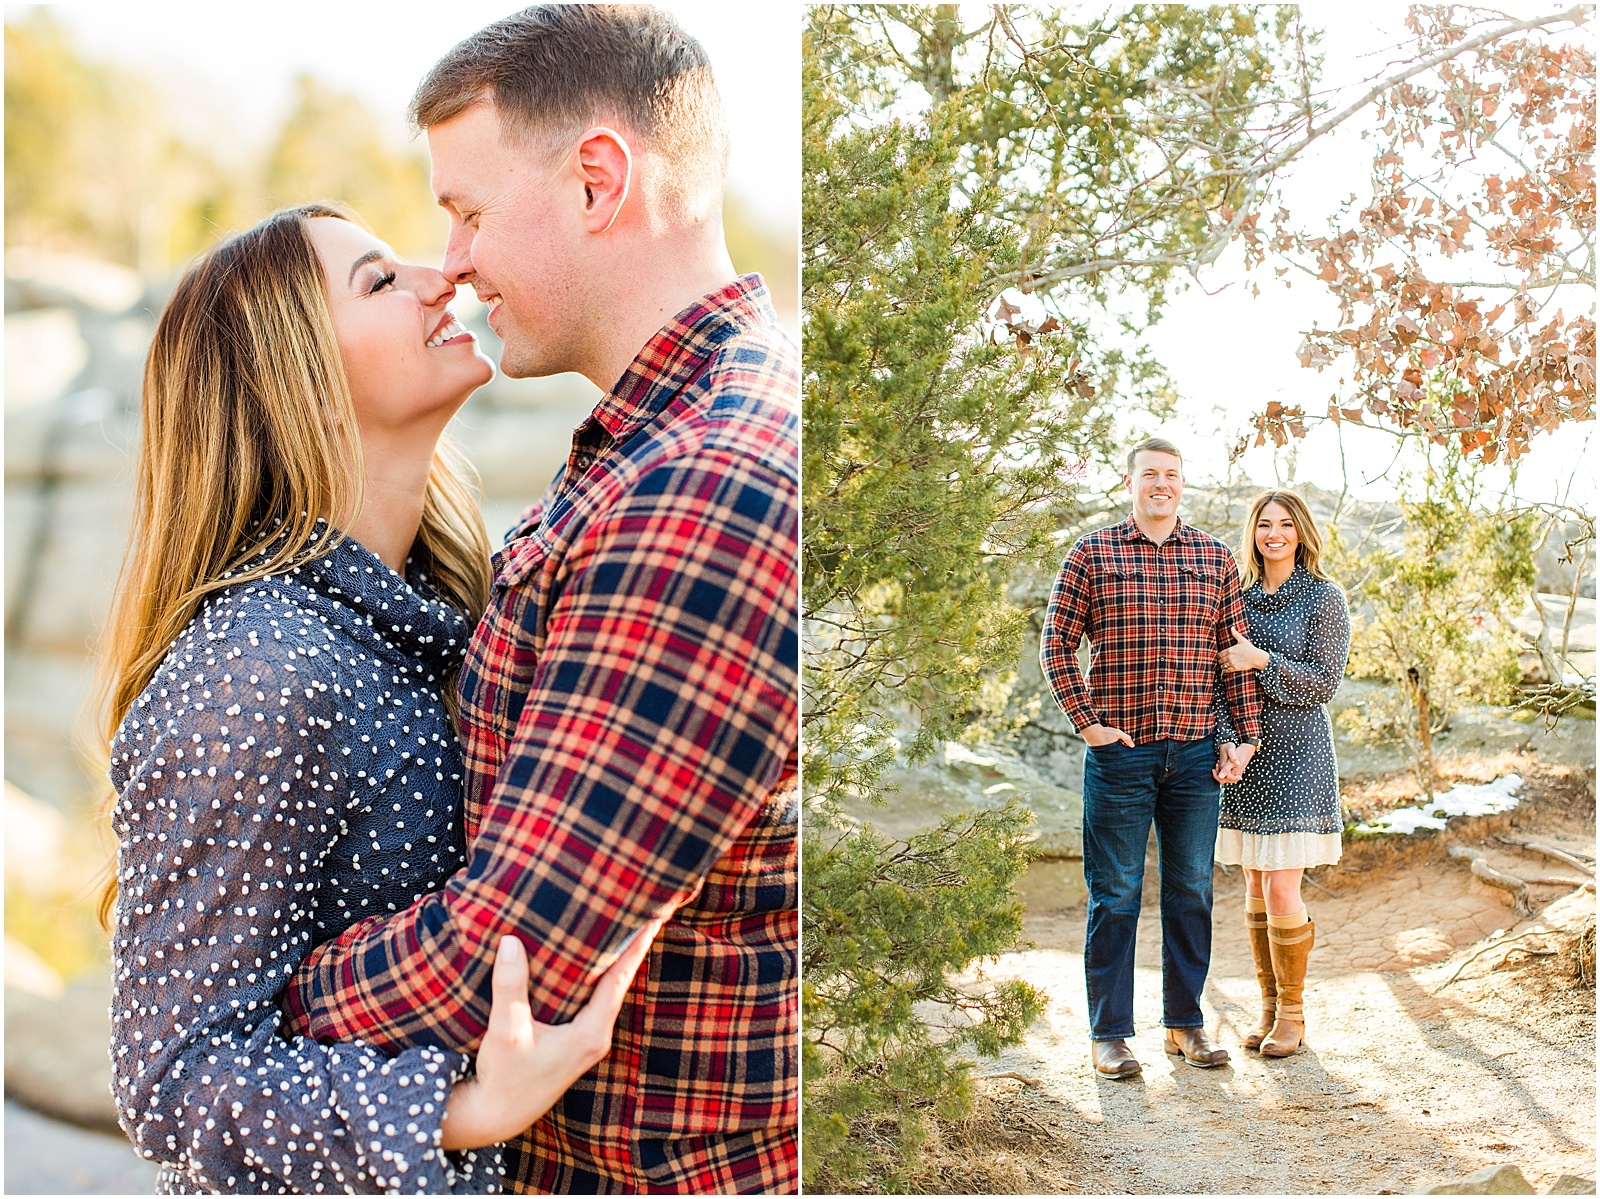 A Sunny Garden of the Gods Engagement Session | Shiloh and Lee | Bret and Brandie Photography005.jpg